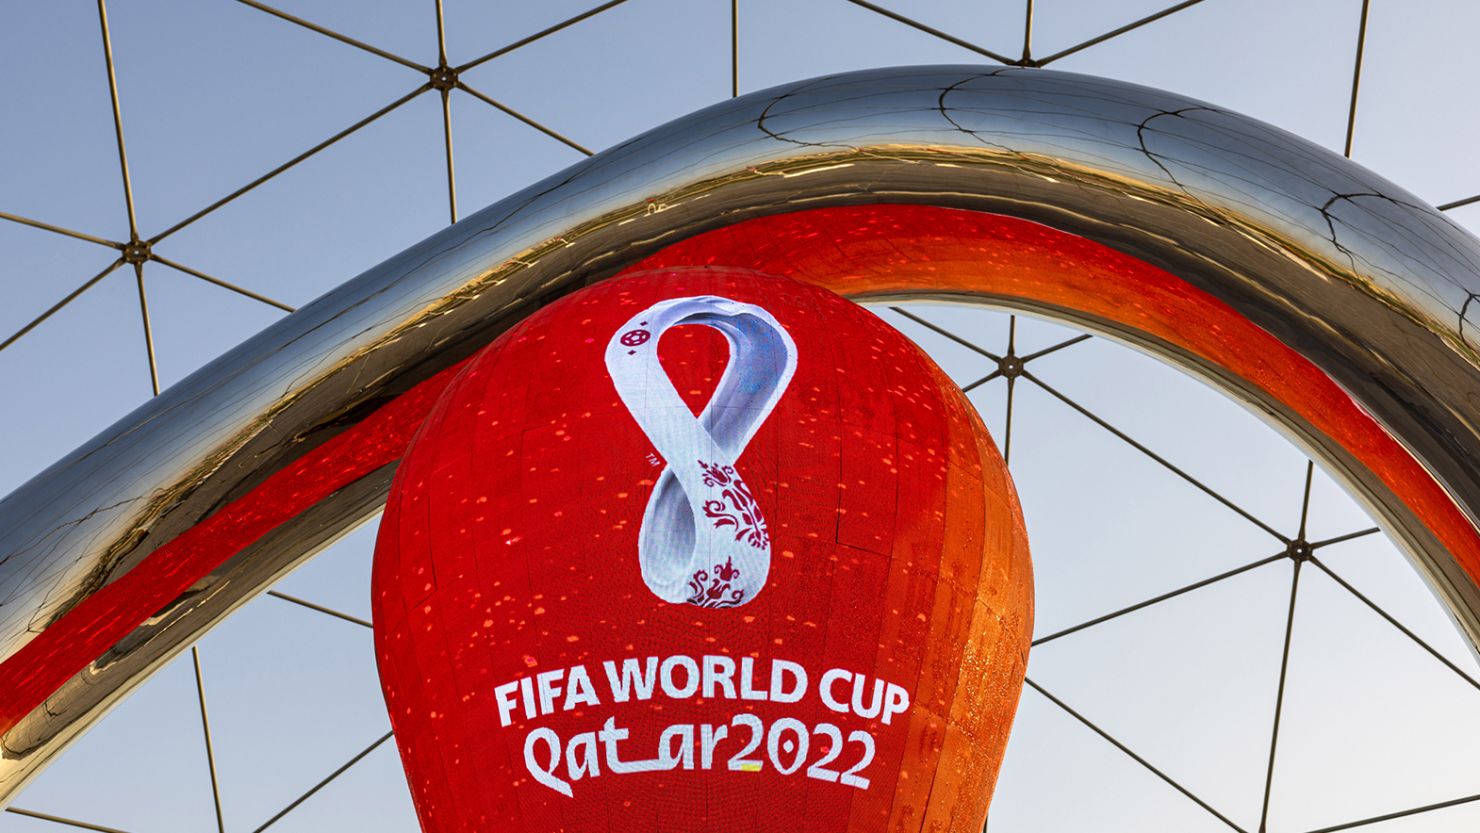 World Cup 2022: FIFA confirms change to start date